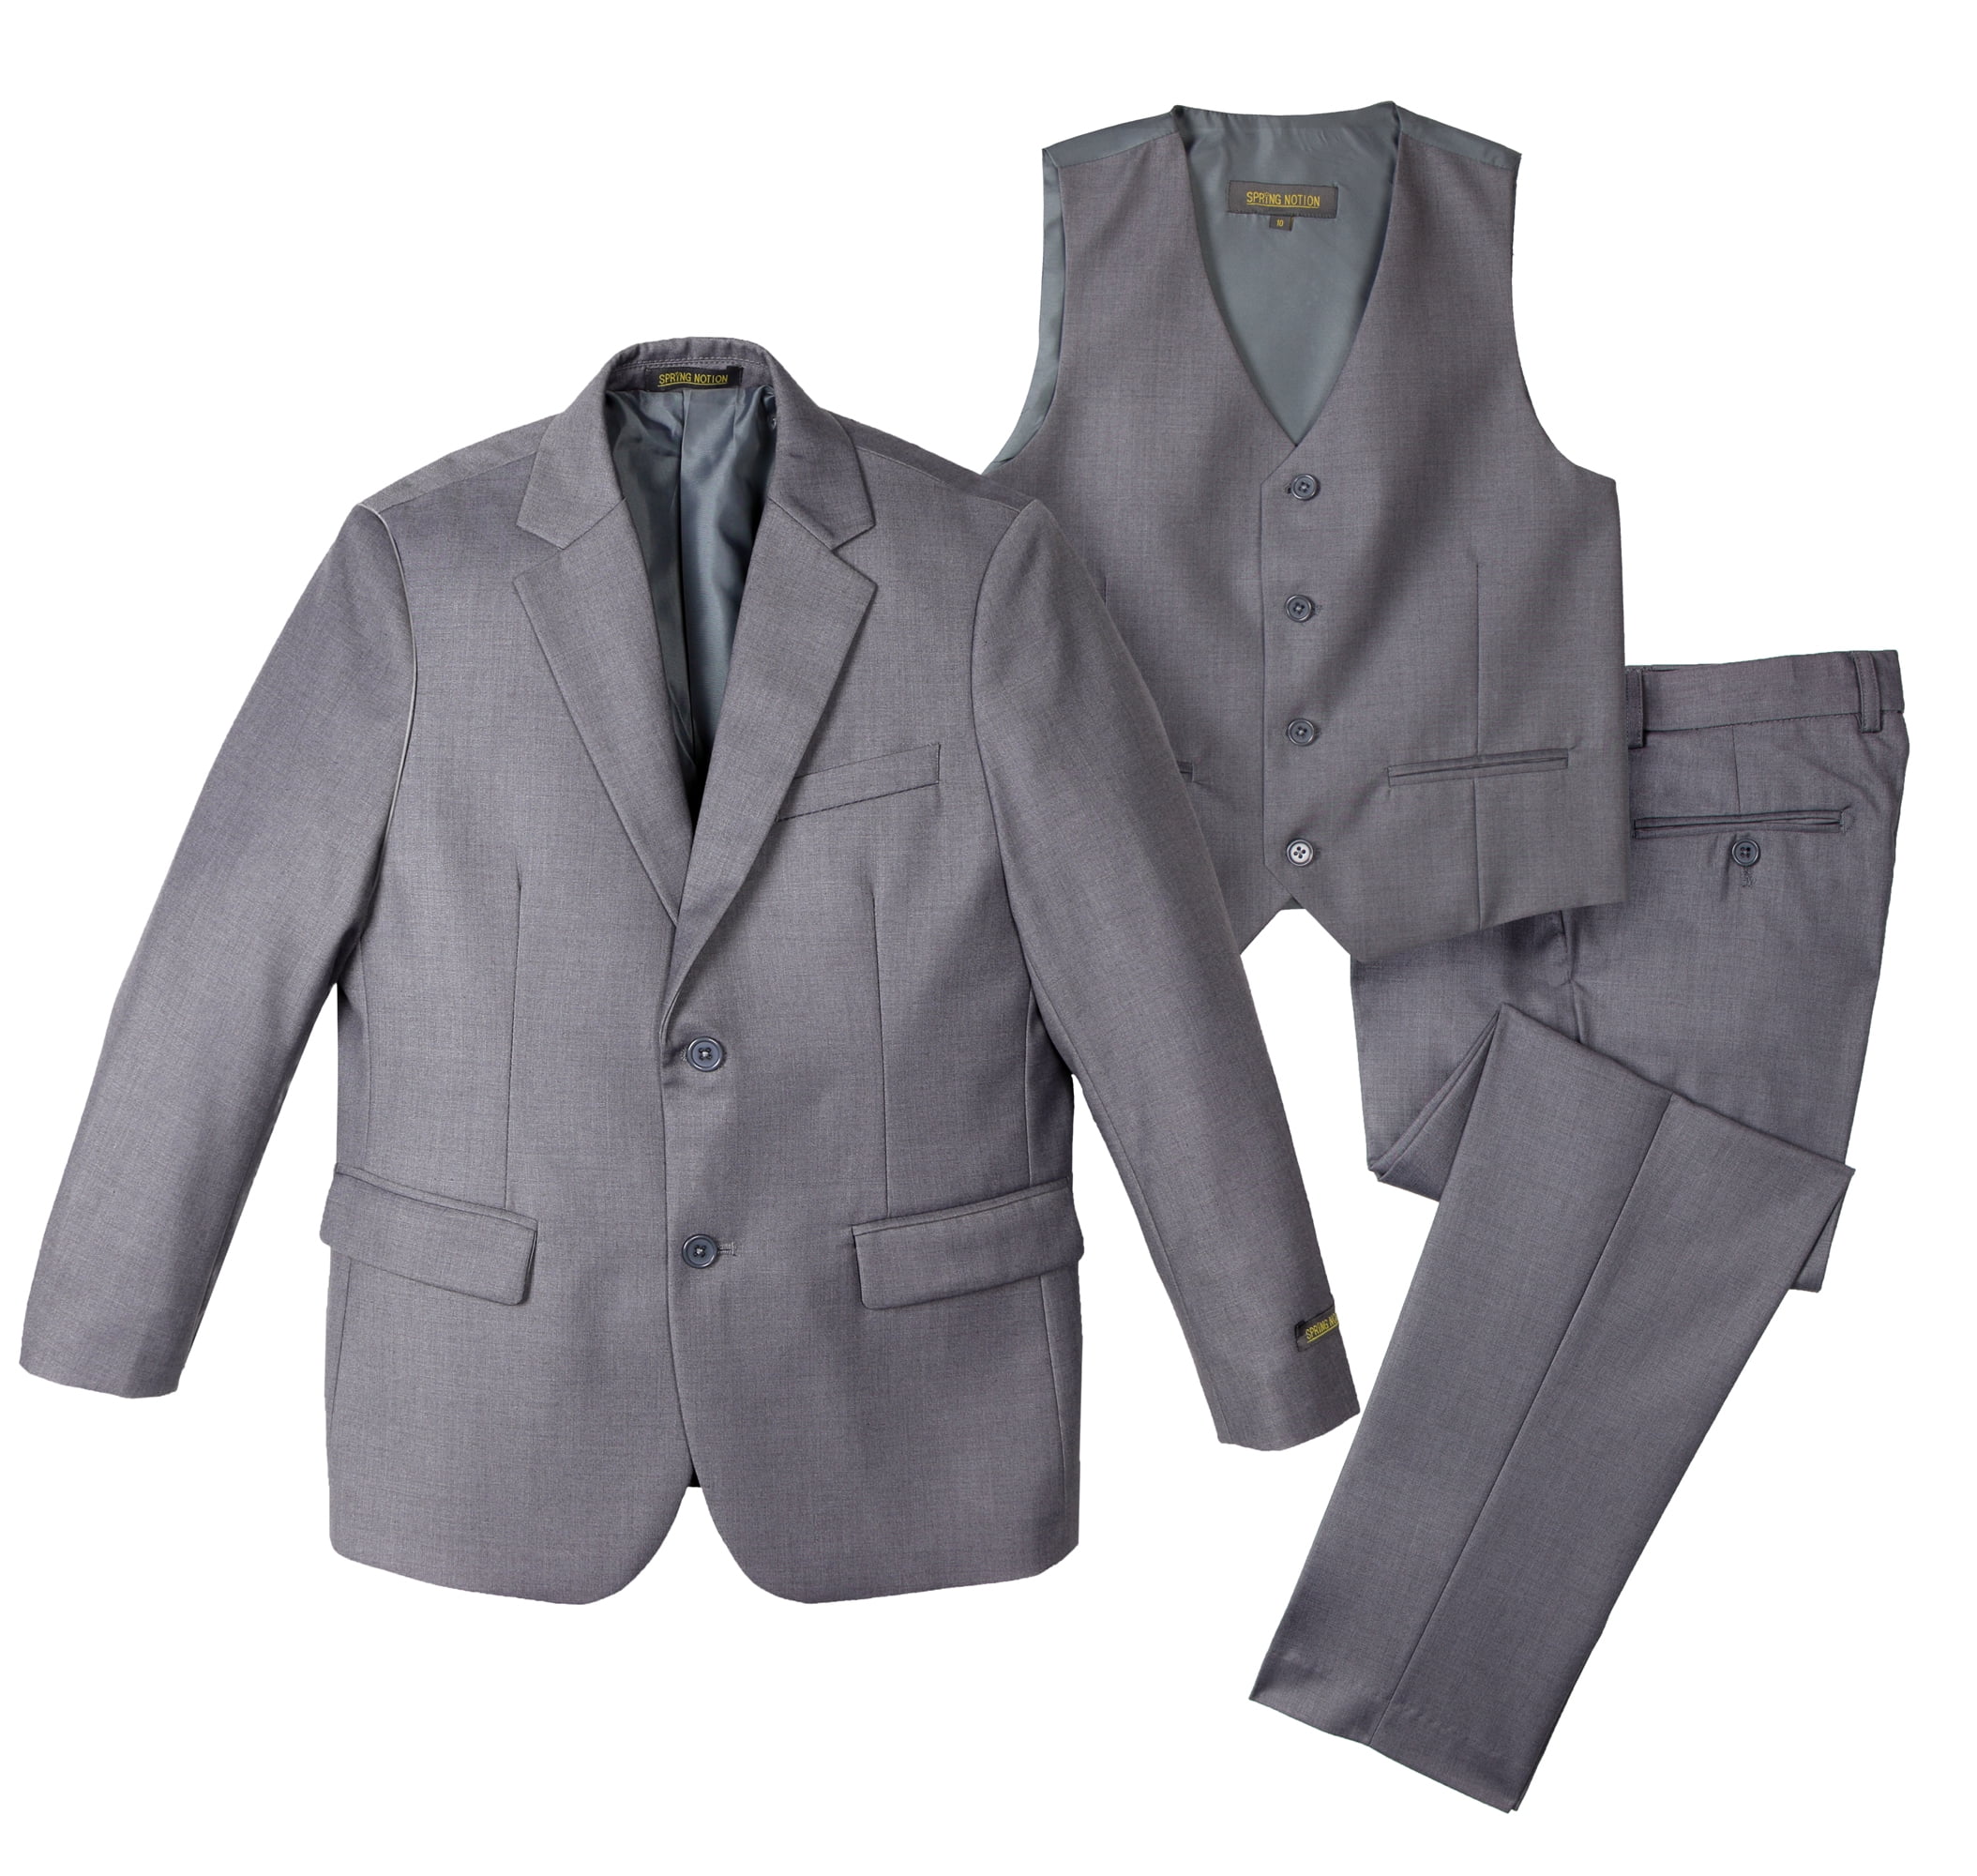 Spring Notion Big Boys Two-Button Suit Light Grey 4T Vest and Pants 